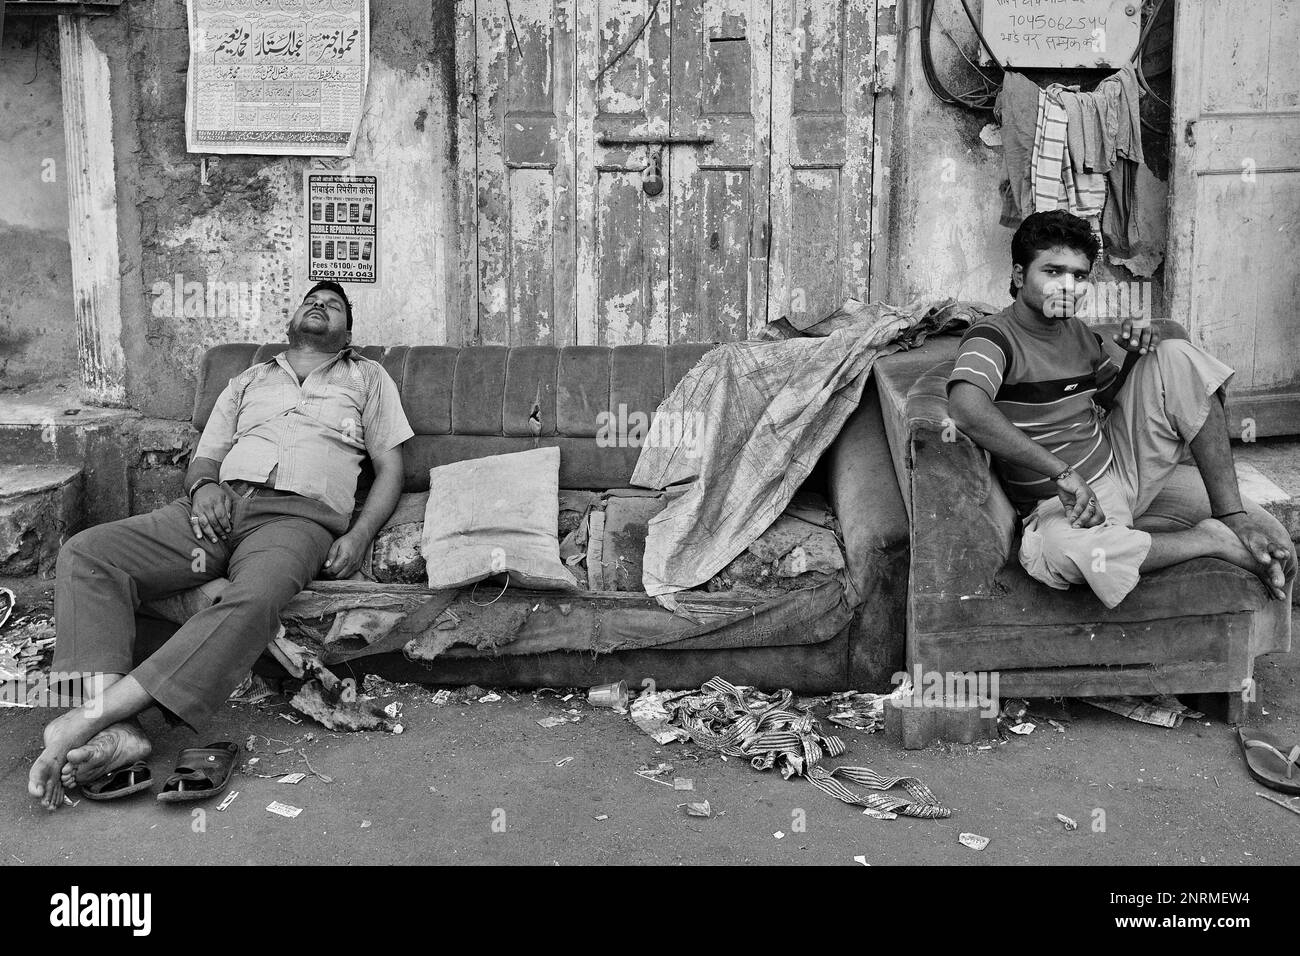 An Indian man sleeping on a discarded, dilapidated sofa, another man sitting on a junked armchair; outside in Arab Galli, Grant Rd., Mumbai, India Stock Photo